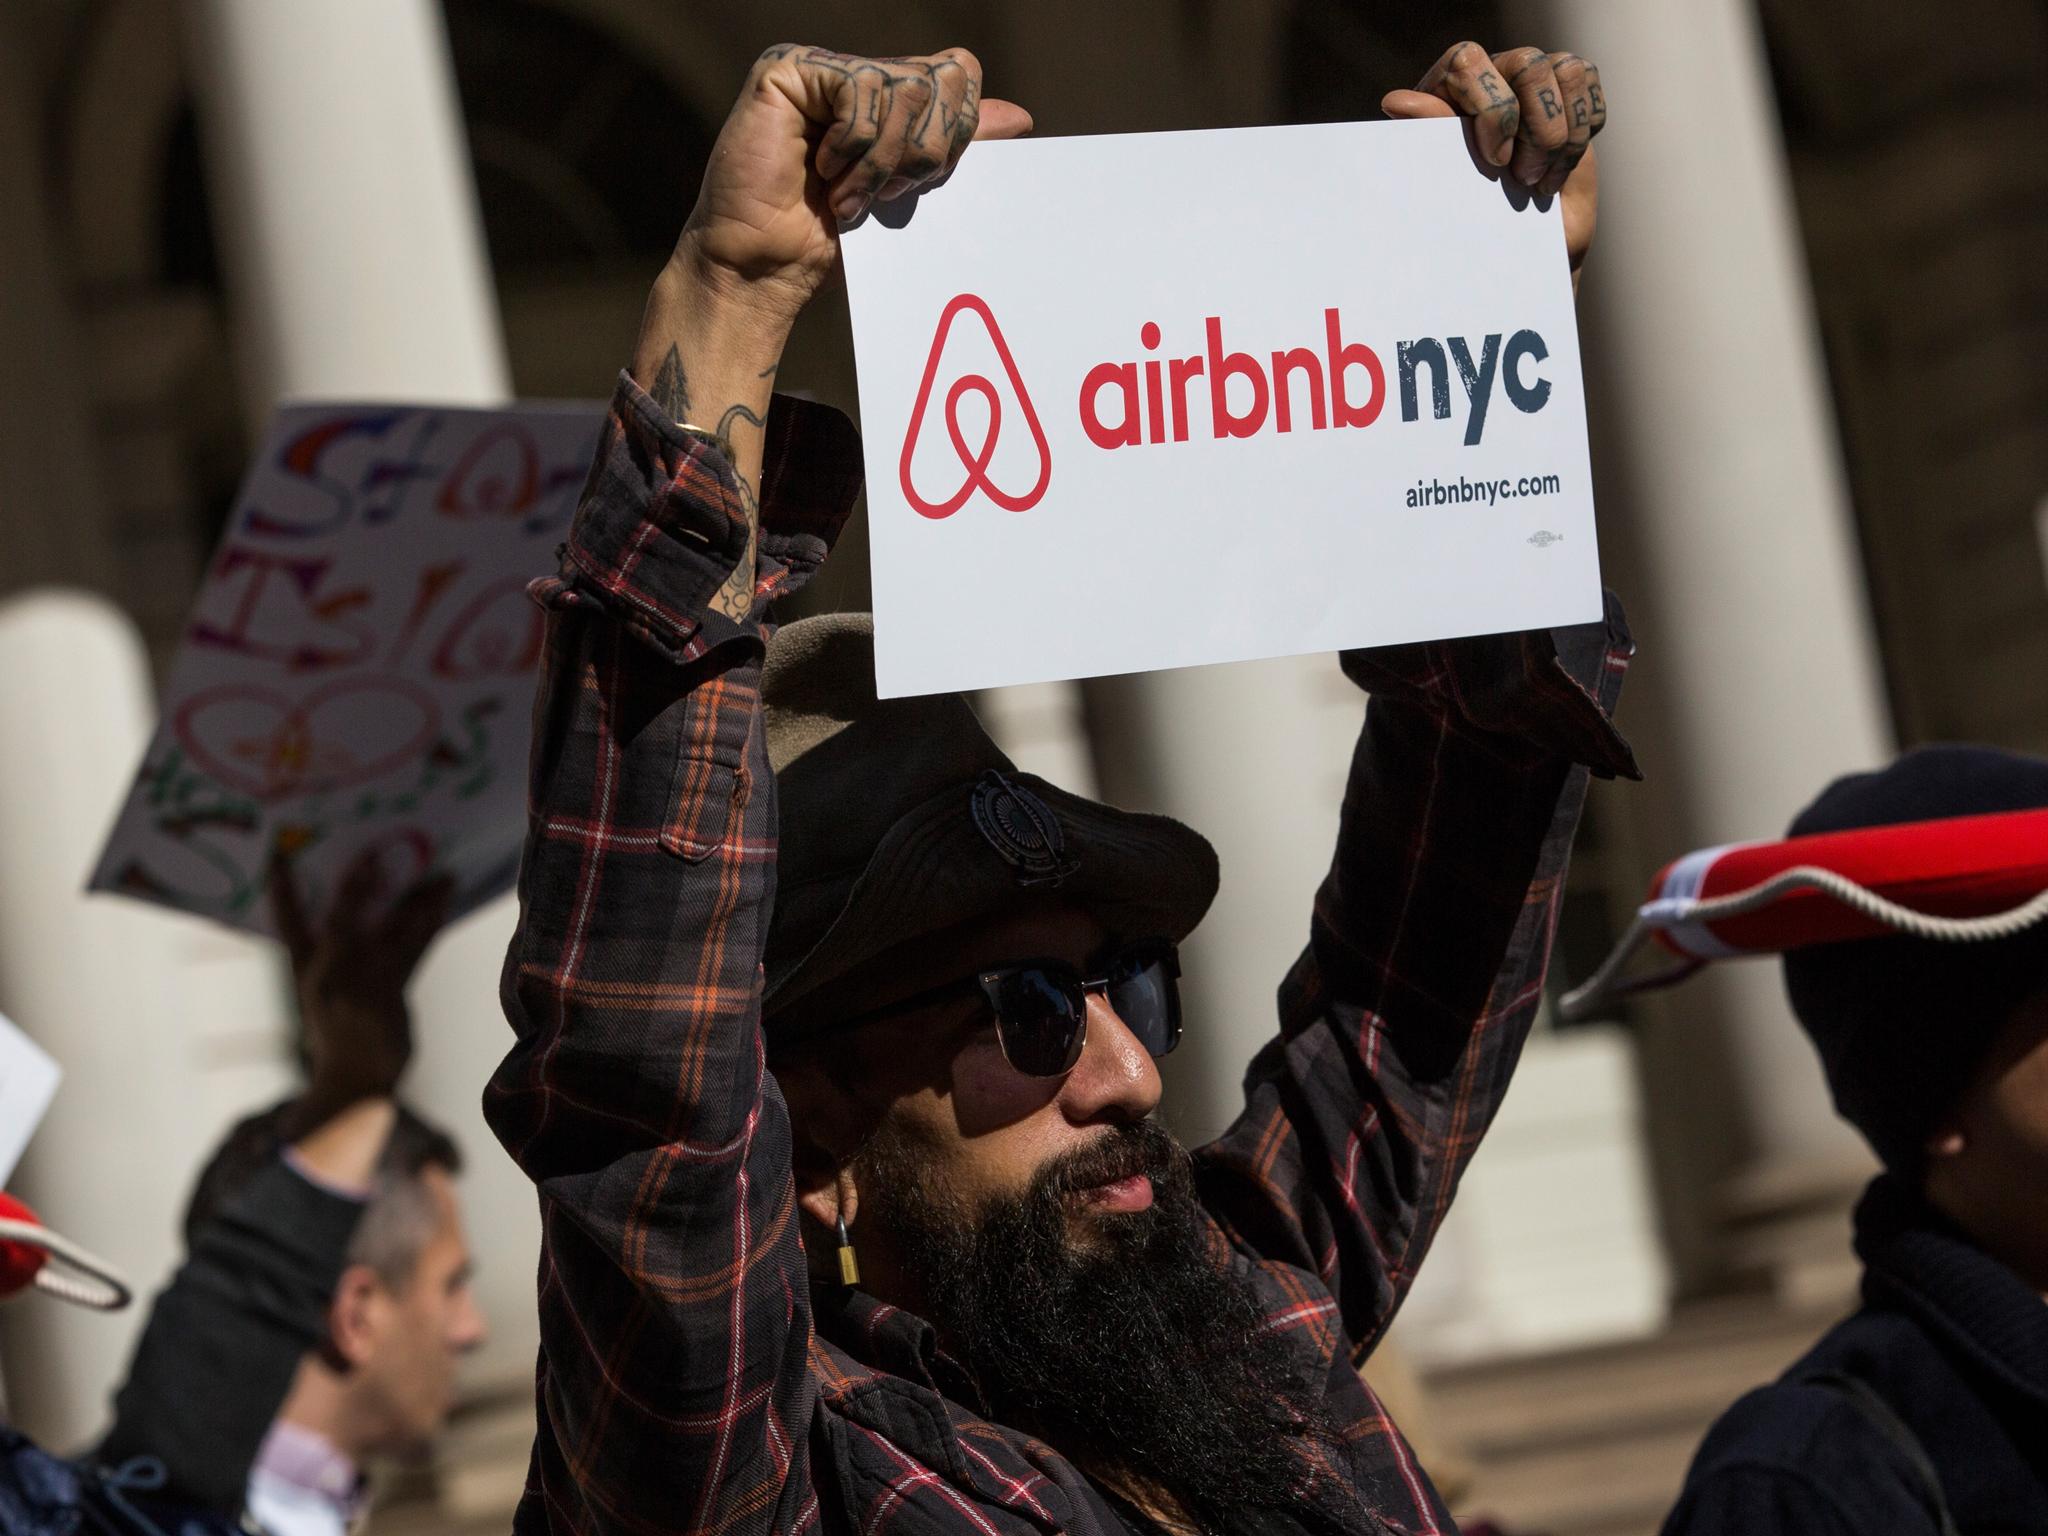 Airbnb says New York politicians make 'targeting the middle class their top priority'